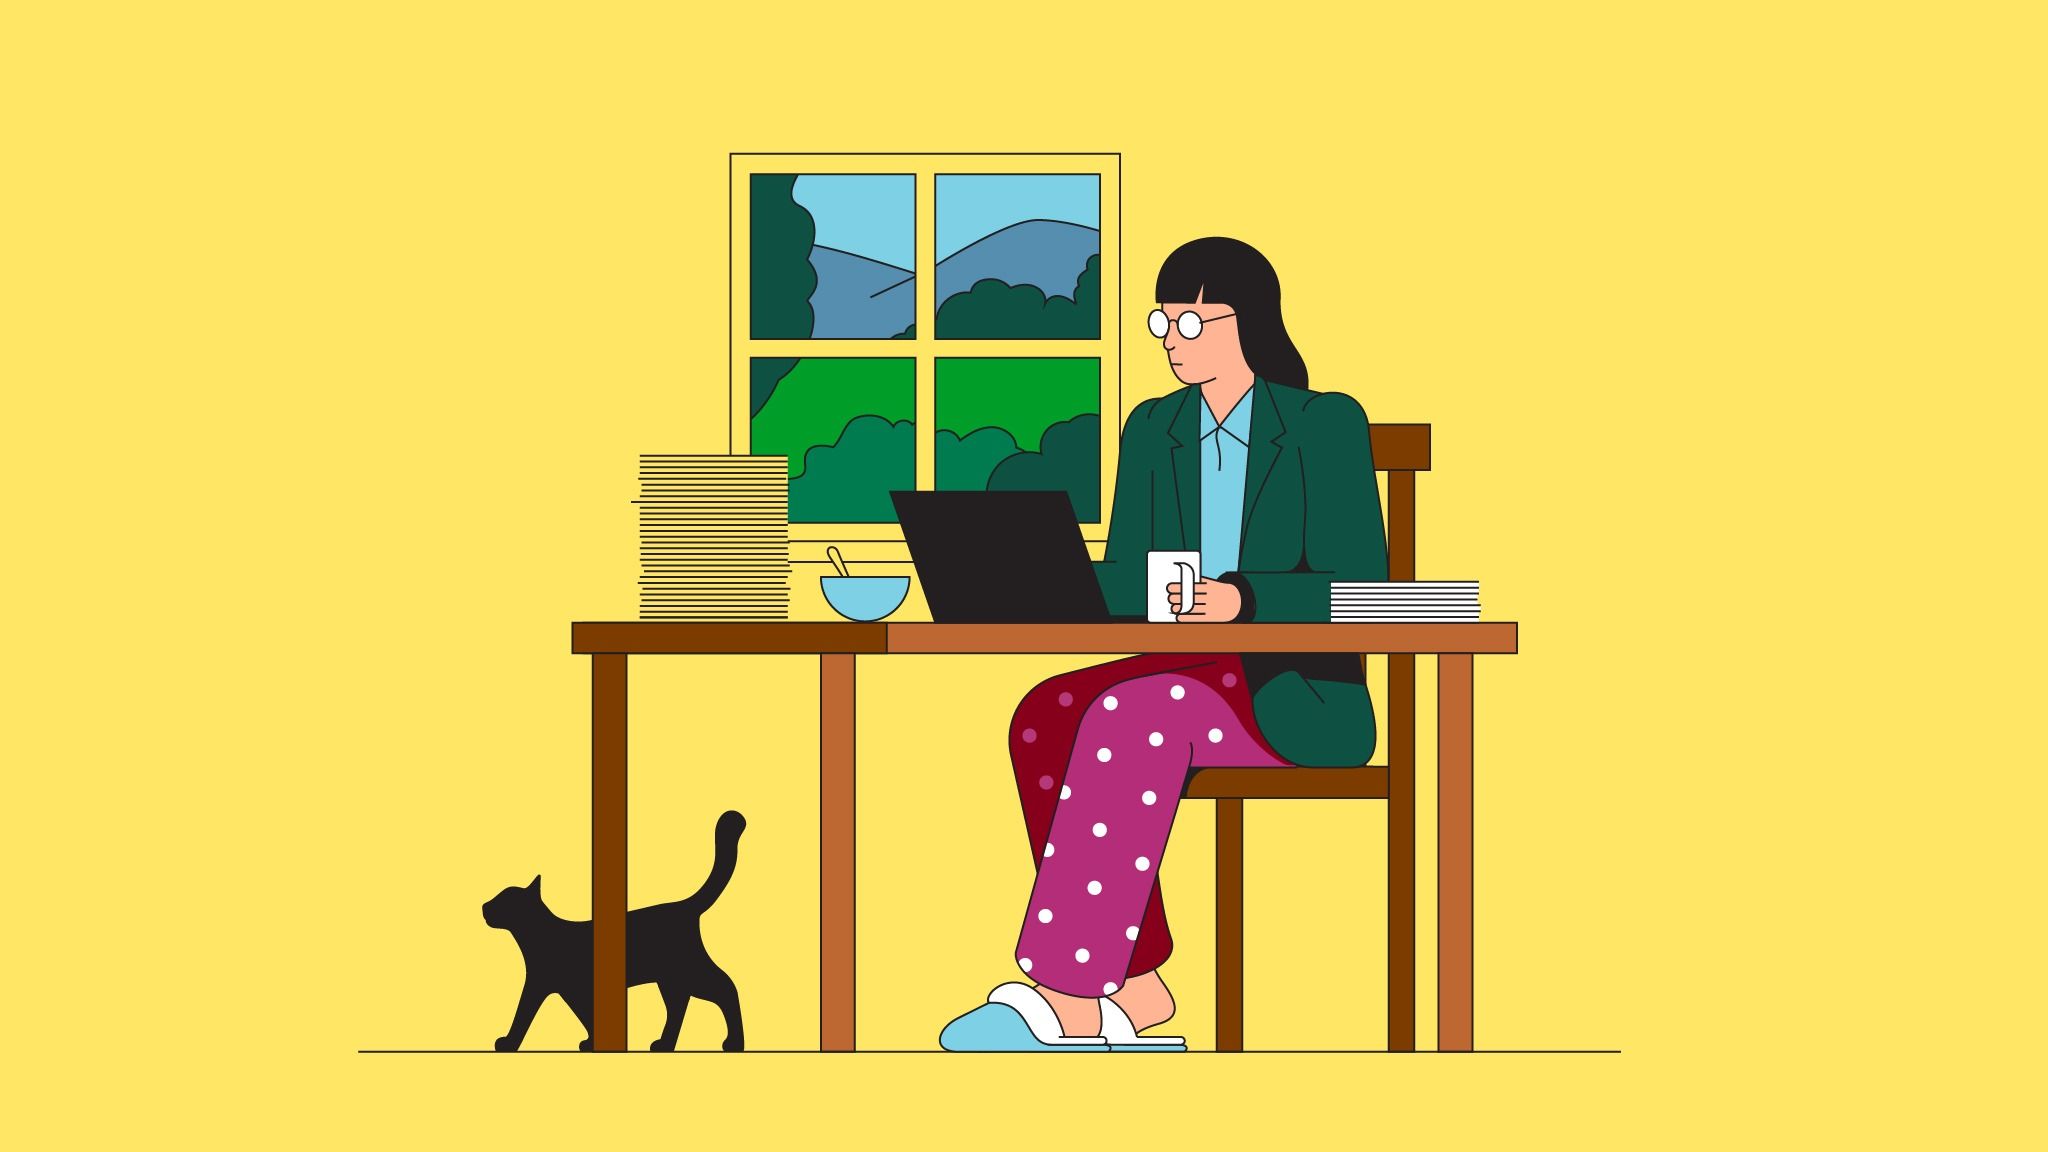 Working from home: The New Normal